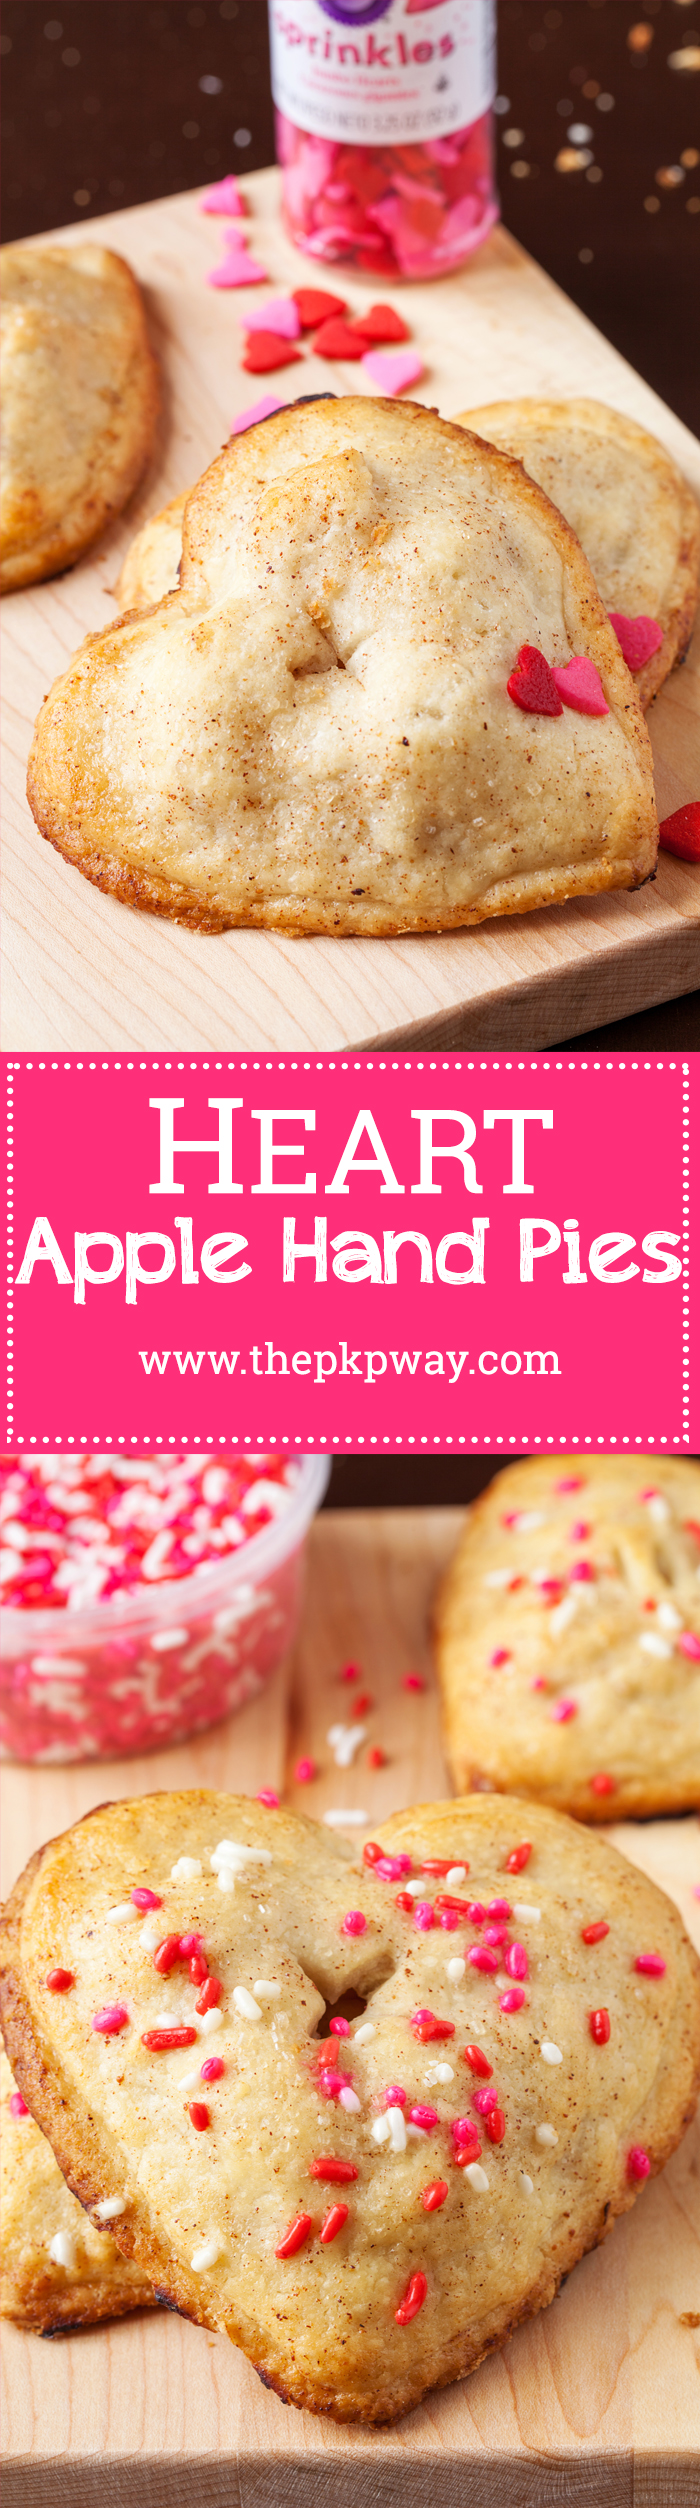 These heart apple hand pies are completely irresistible with their utterly flaky crust and scrumptious cinnamon and apple filling.